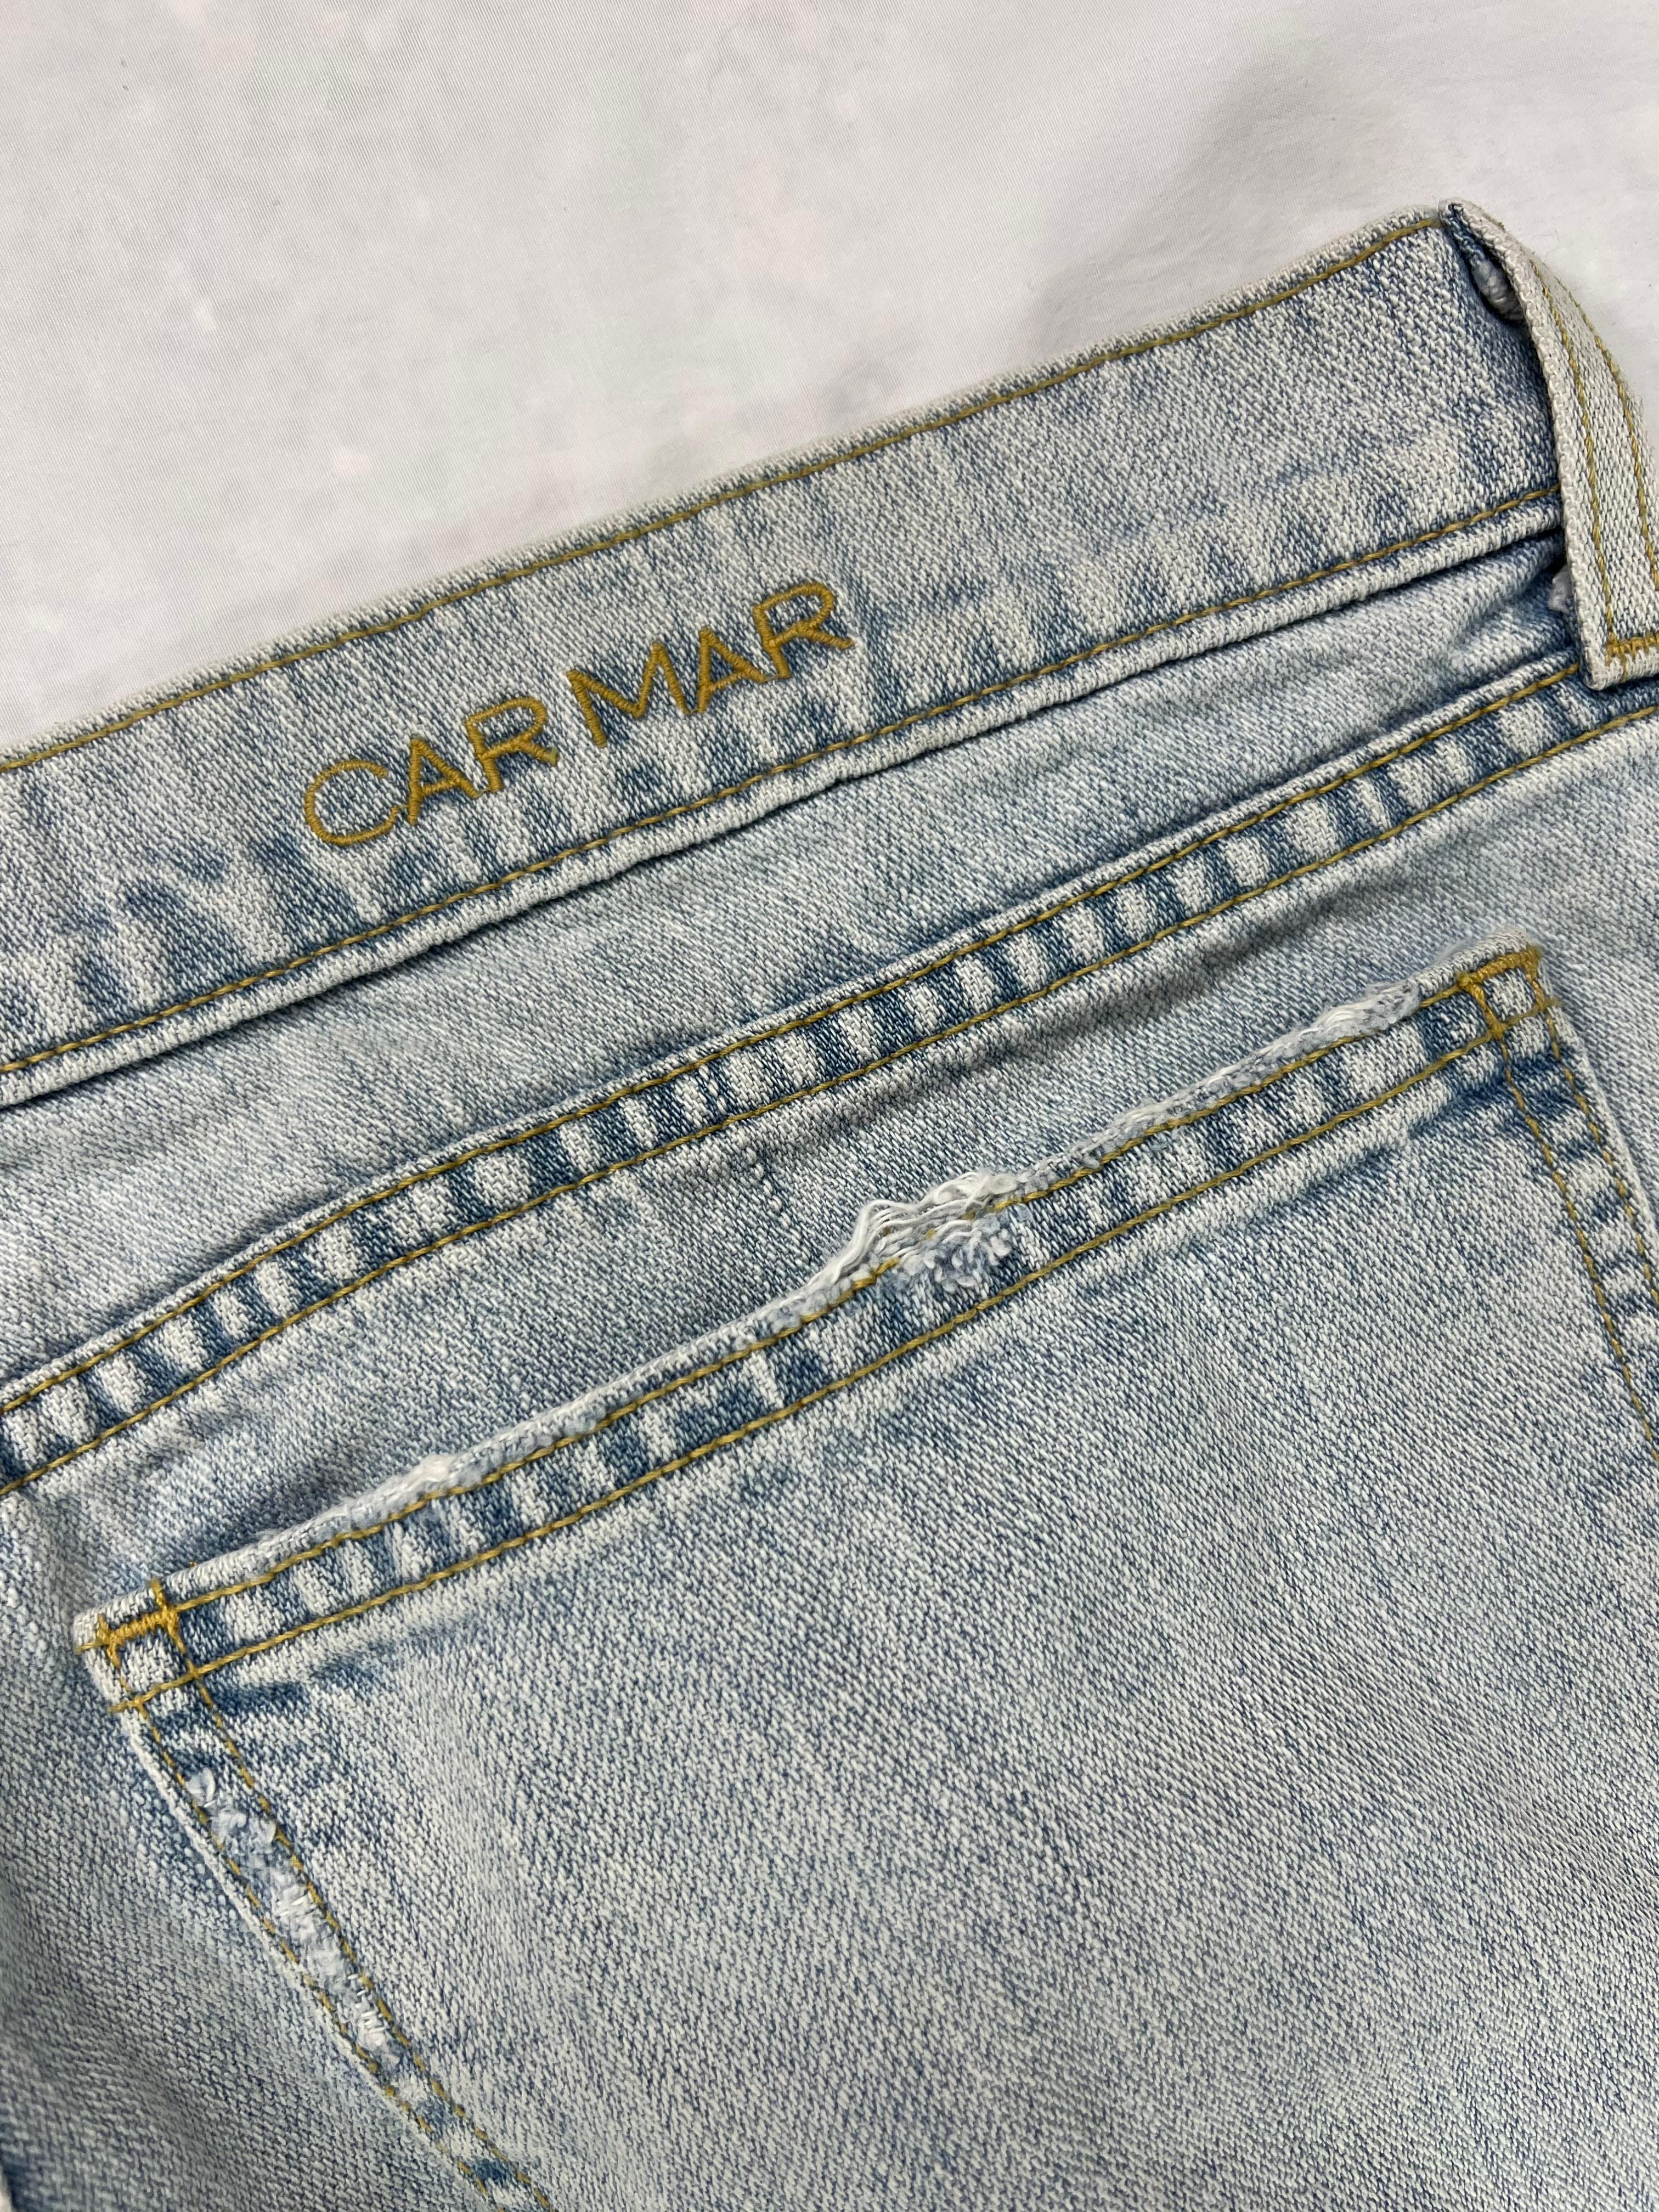 Product details:

The jeans feature light wash denim, distressed design on the front and straight leg fit.